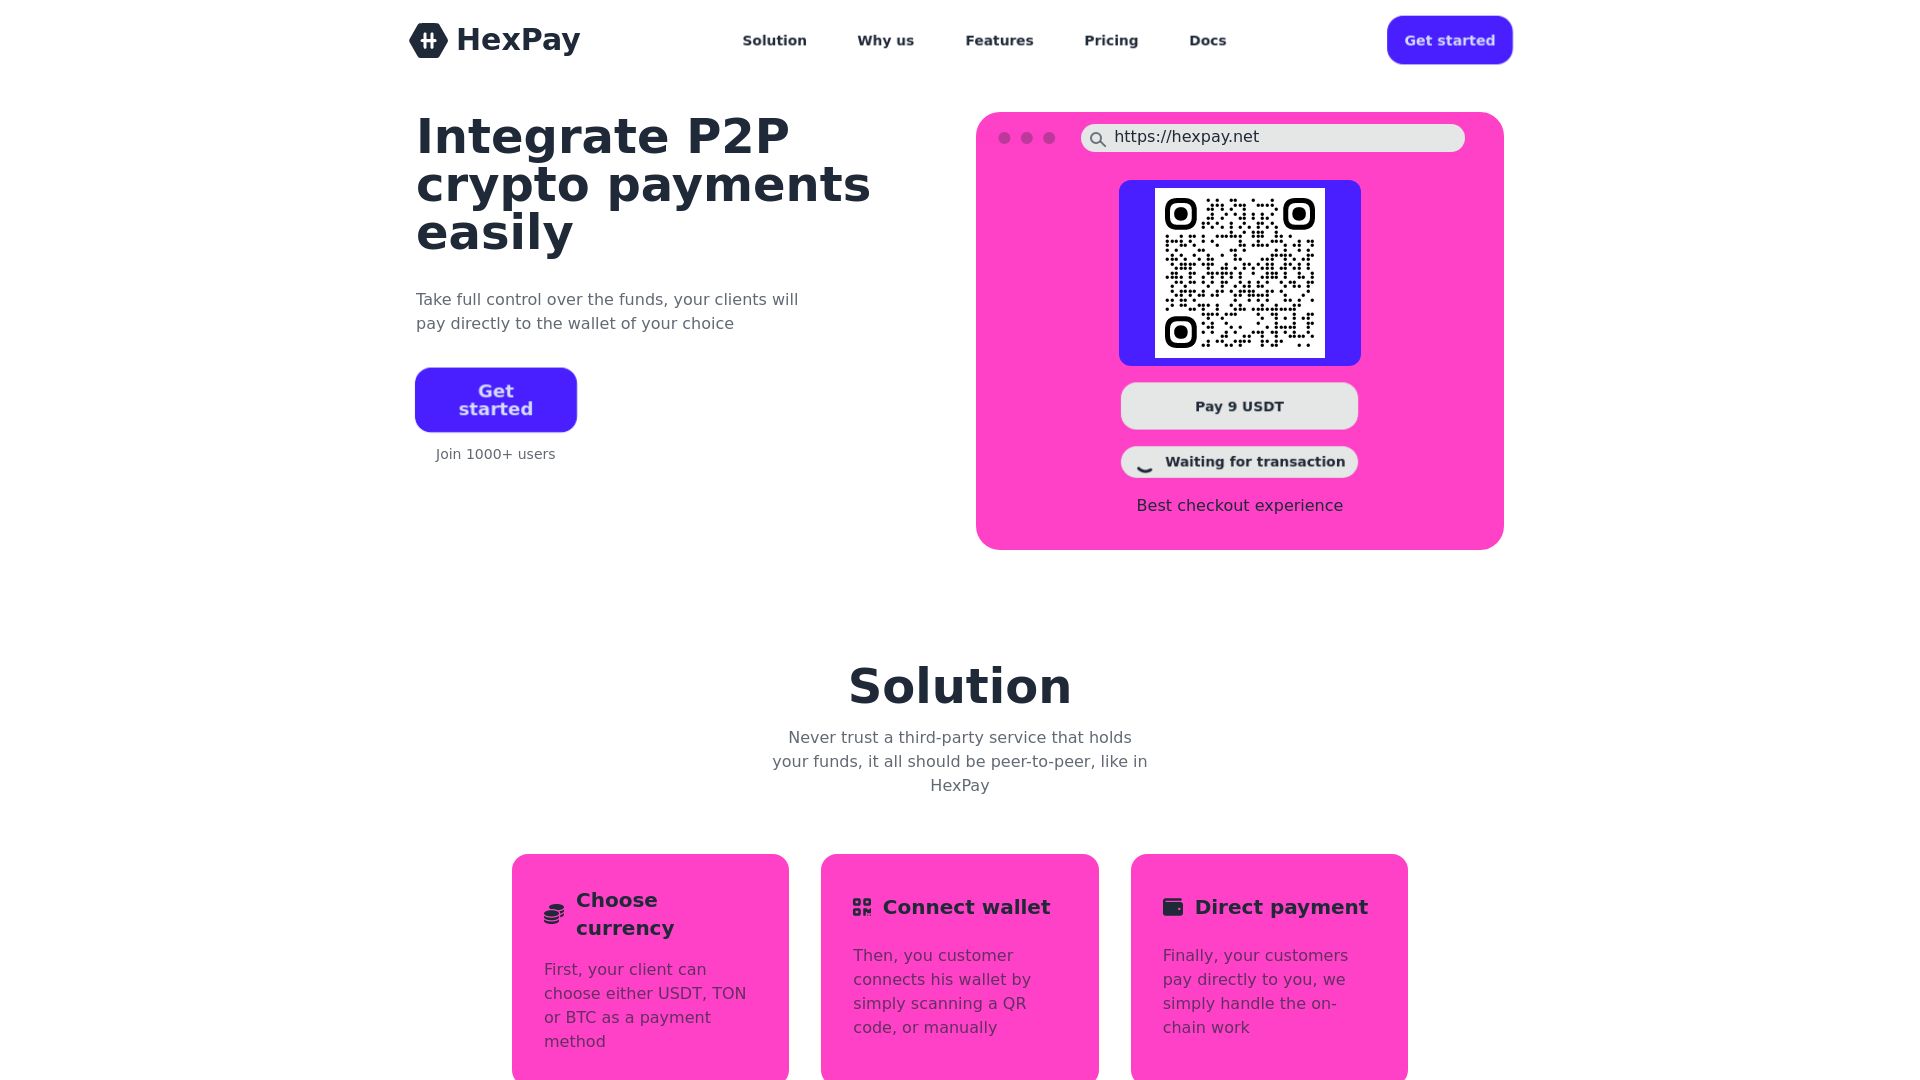 HexPay | Secure P2P Crypto Payment Merchant and Gateway